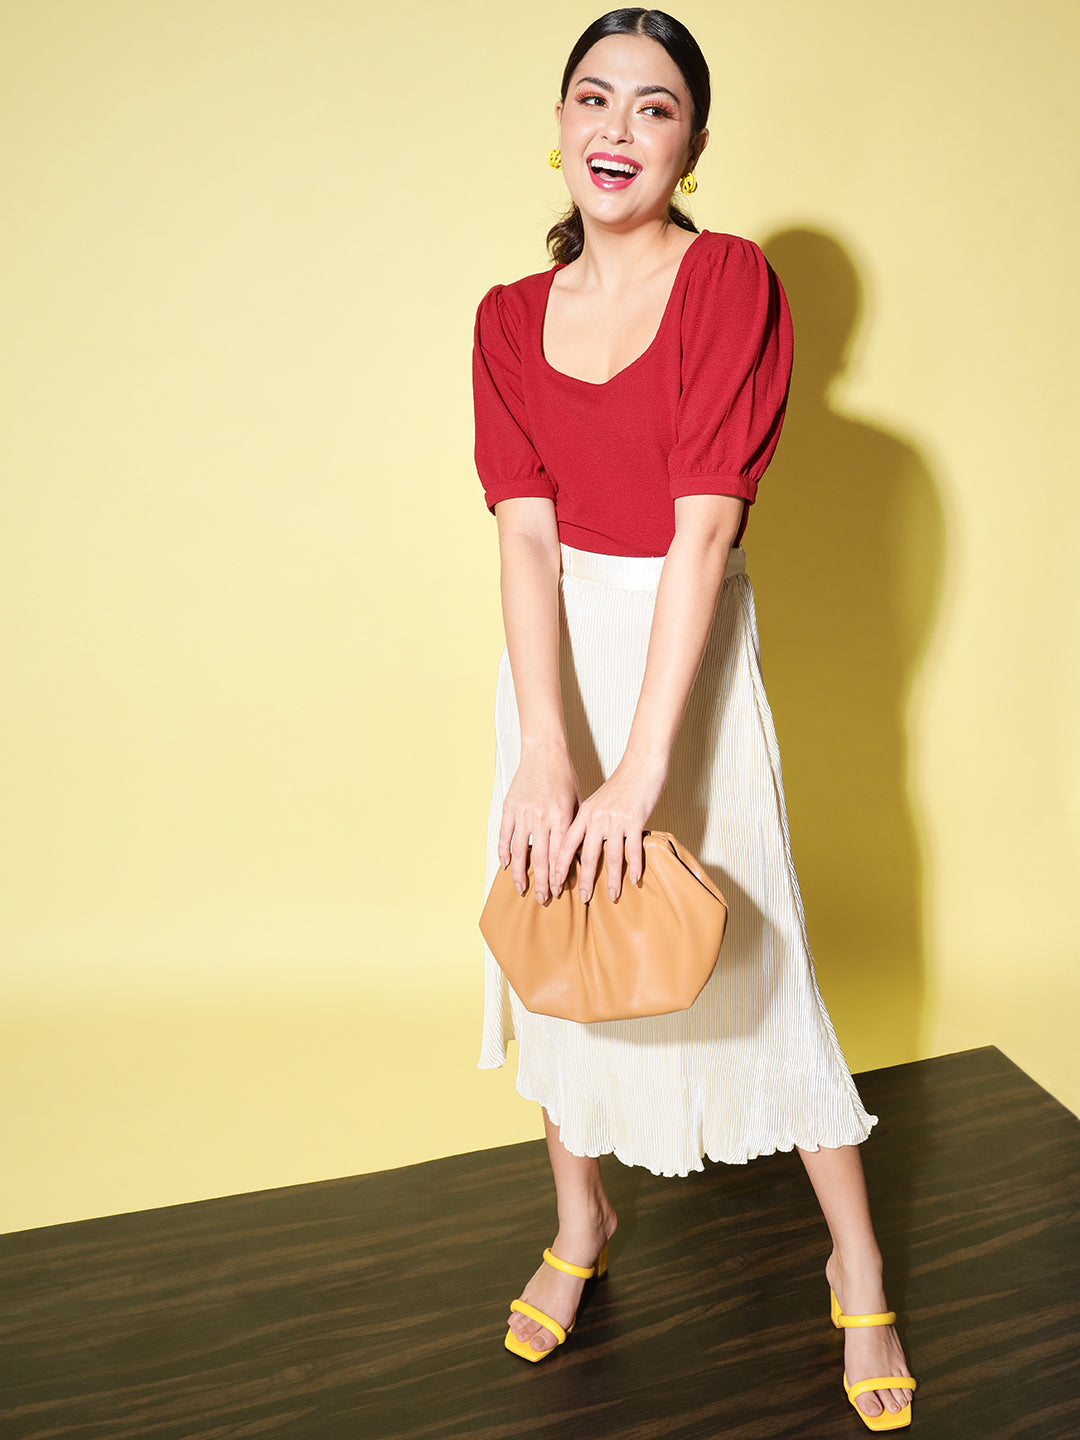 Red Puff Sleeve Top